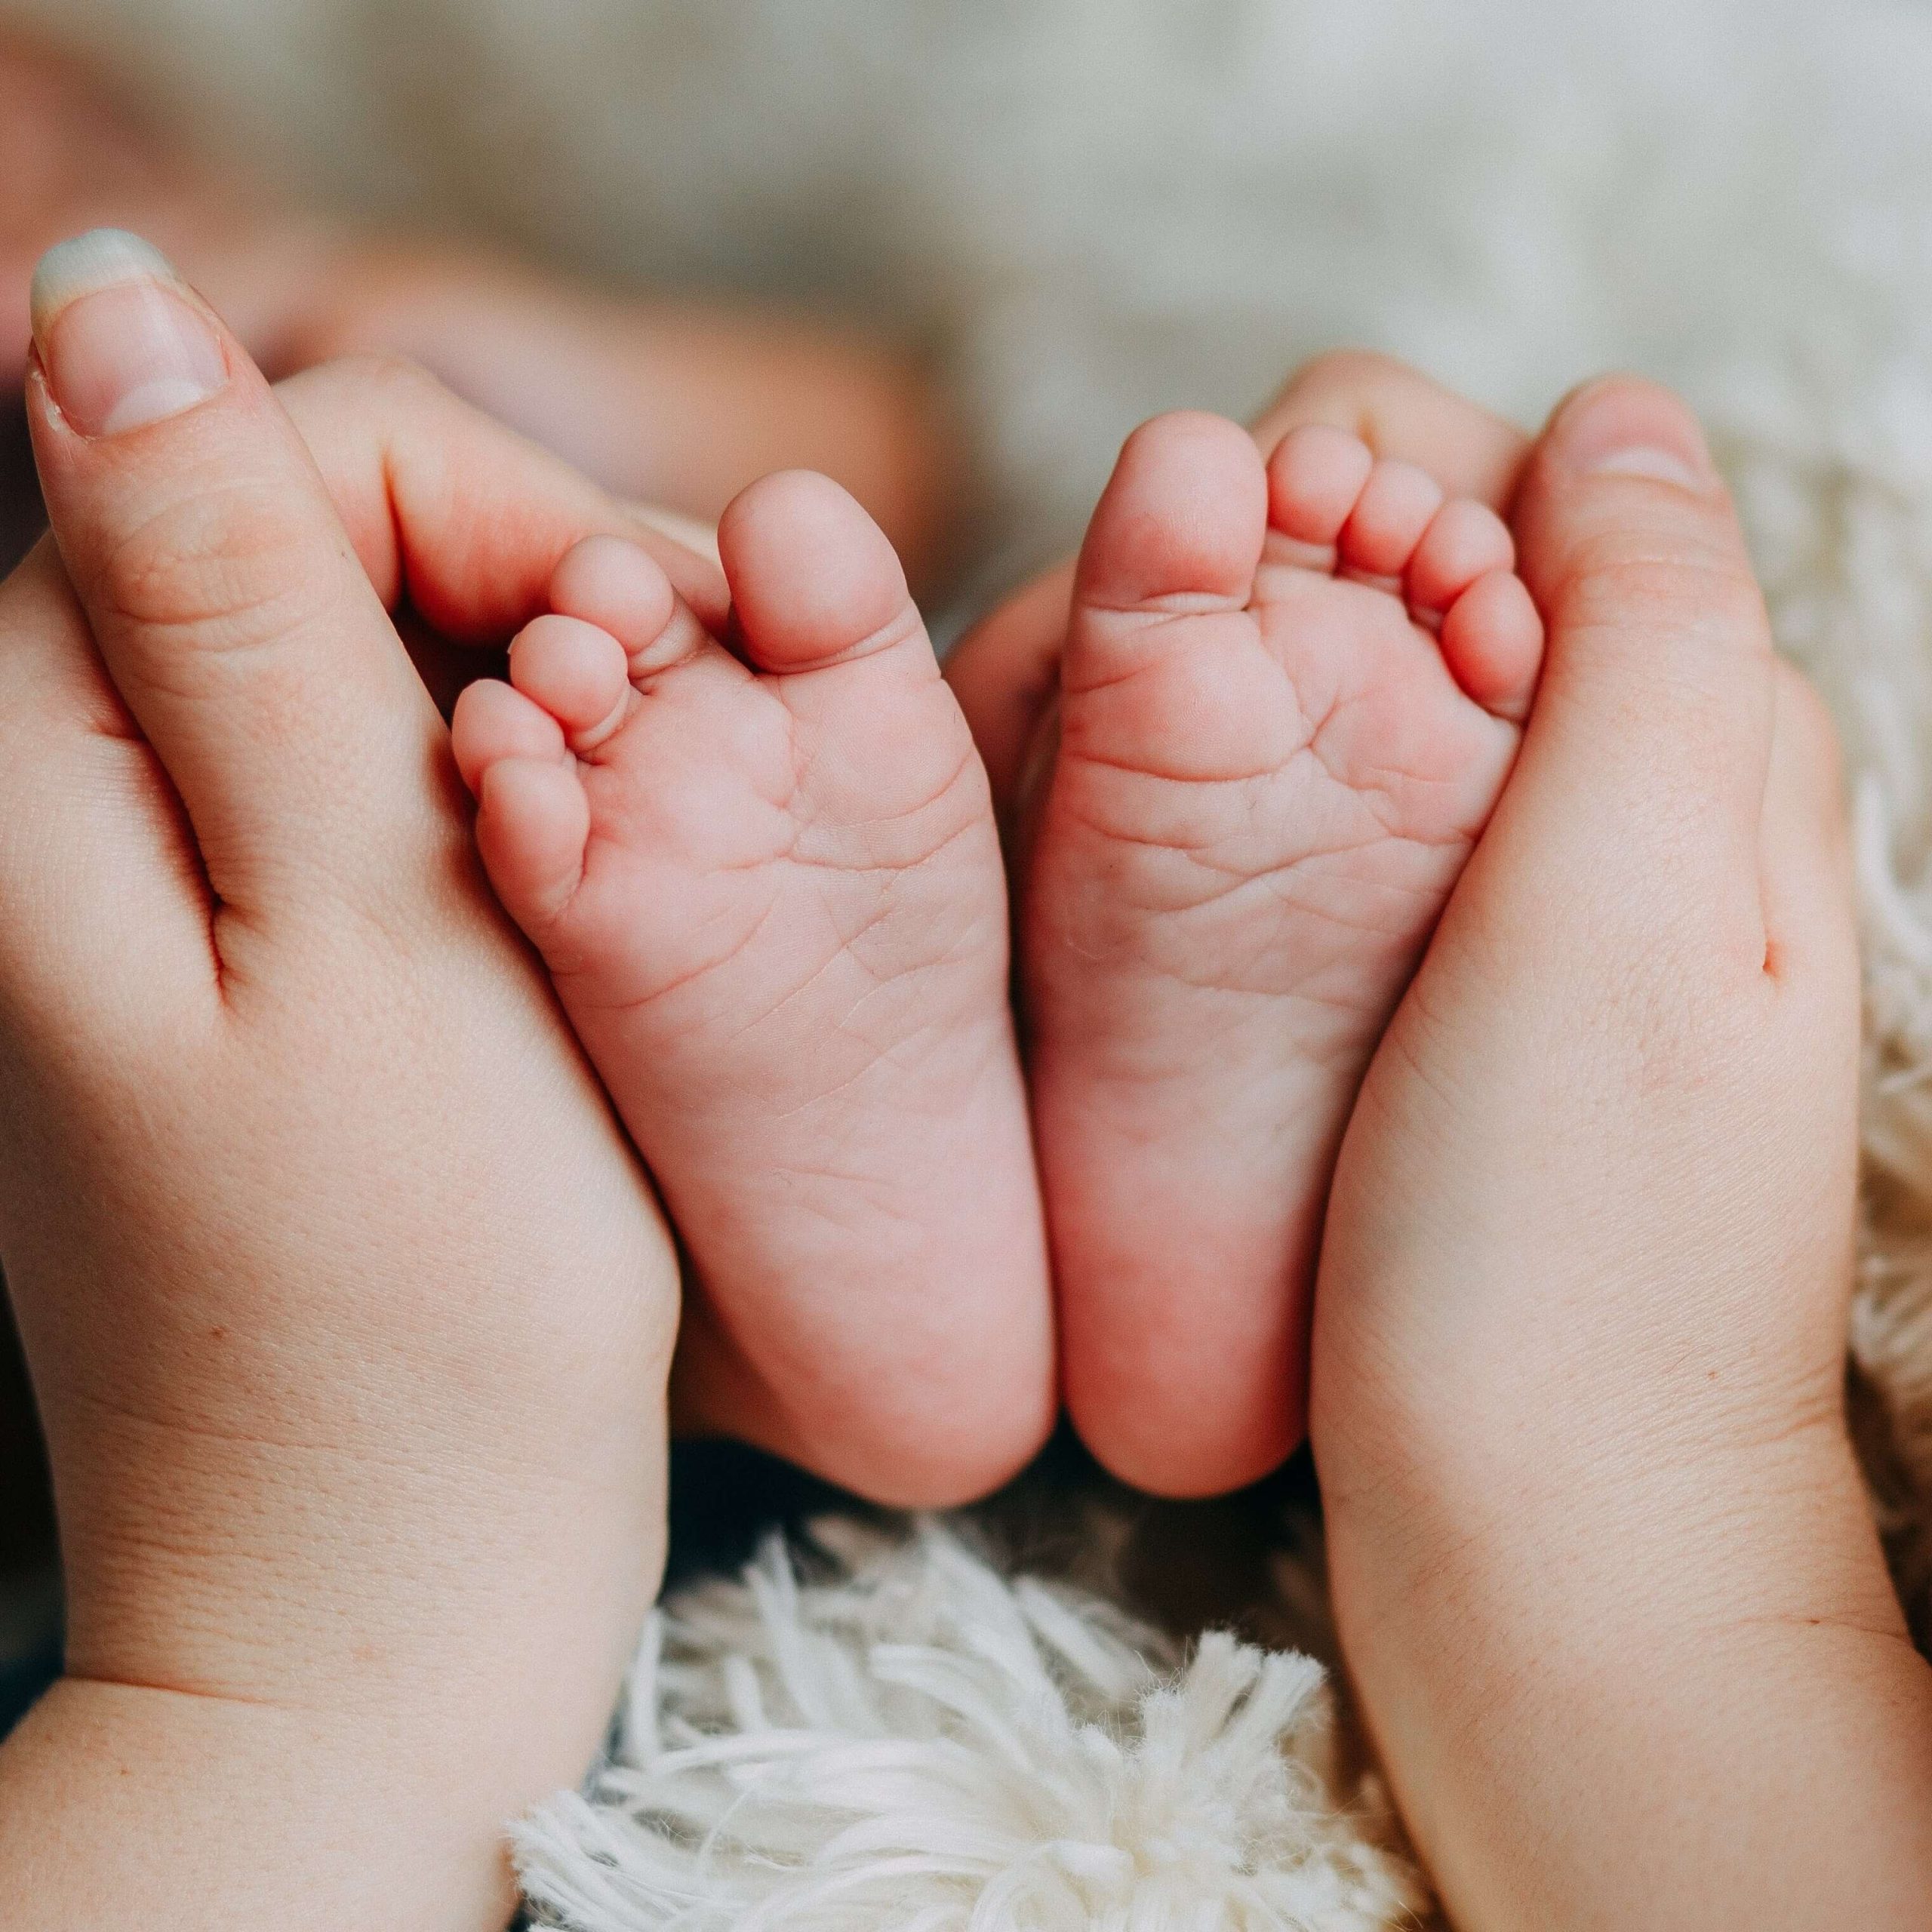 How to care for baby's feet - Dulwich Podiatry